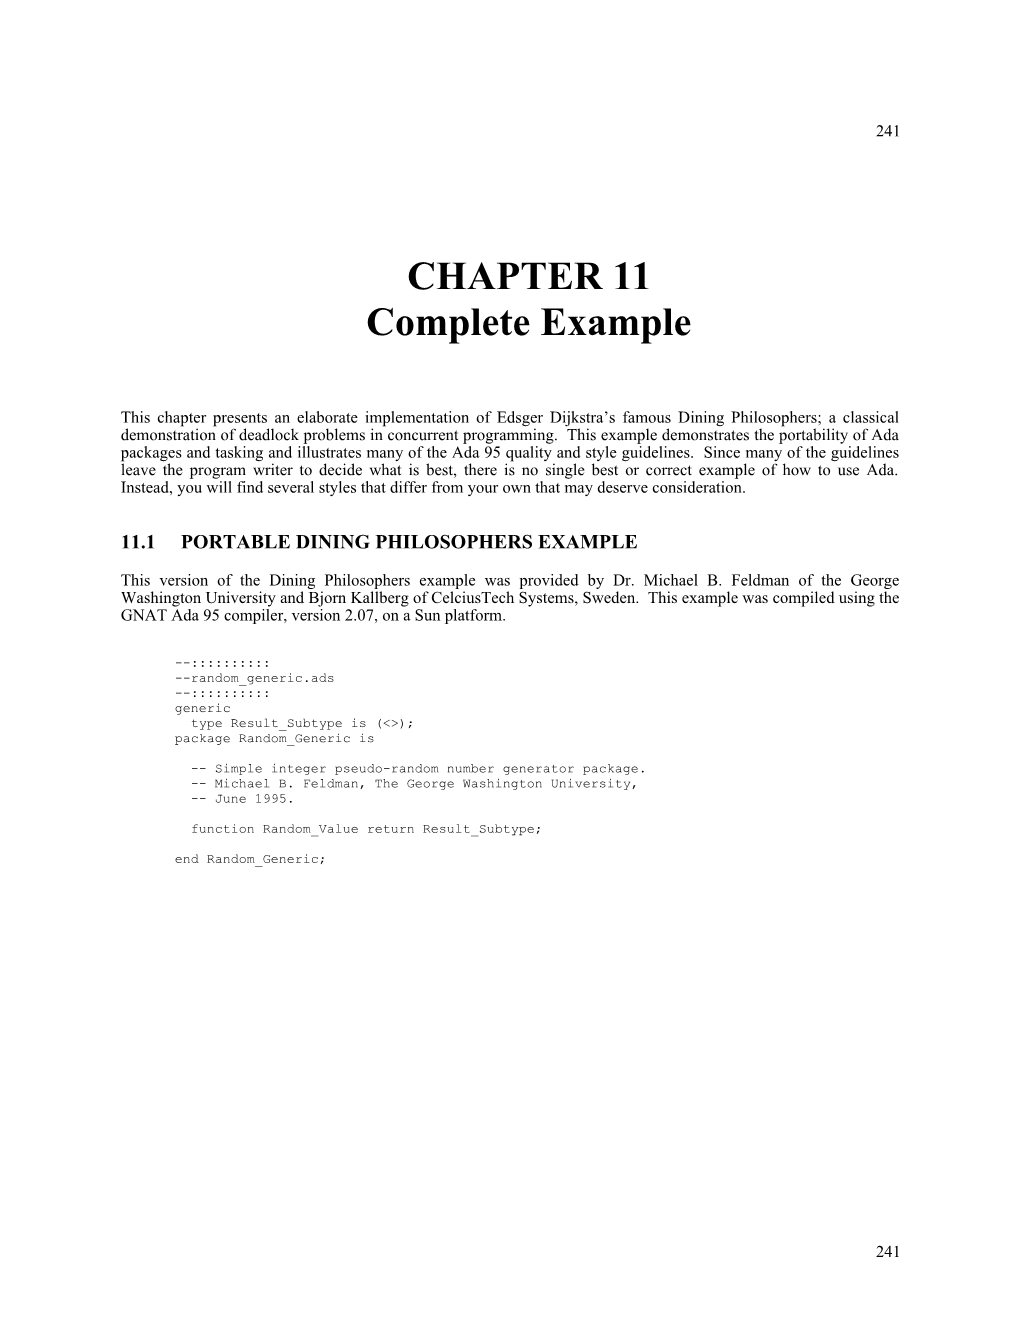 CHAPTER 11Complete Example